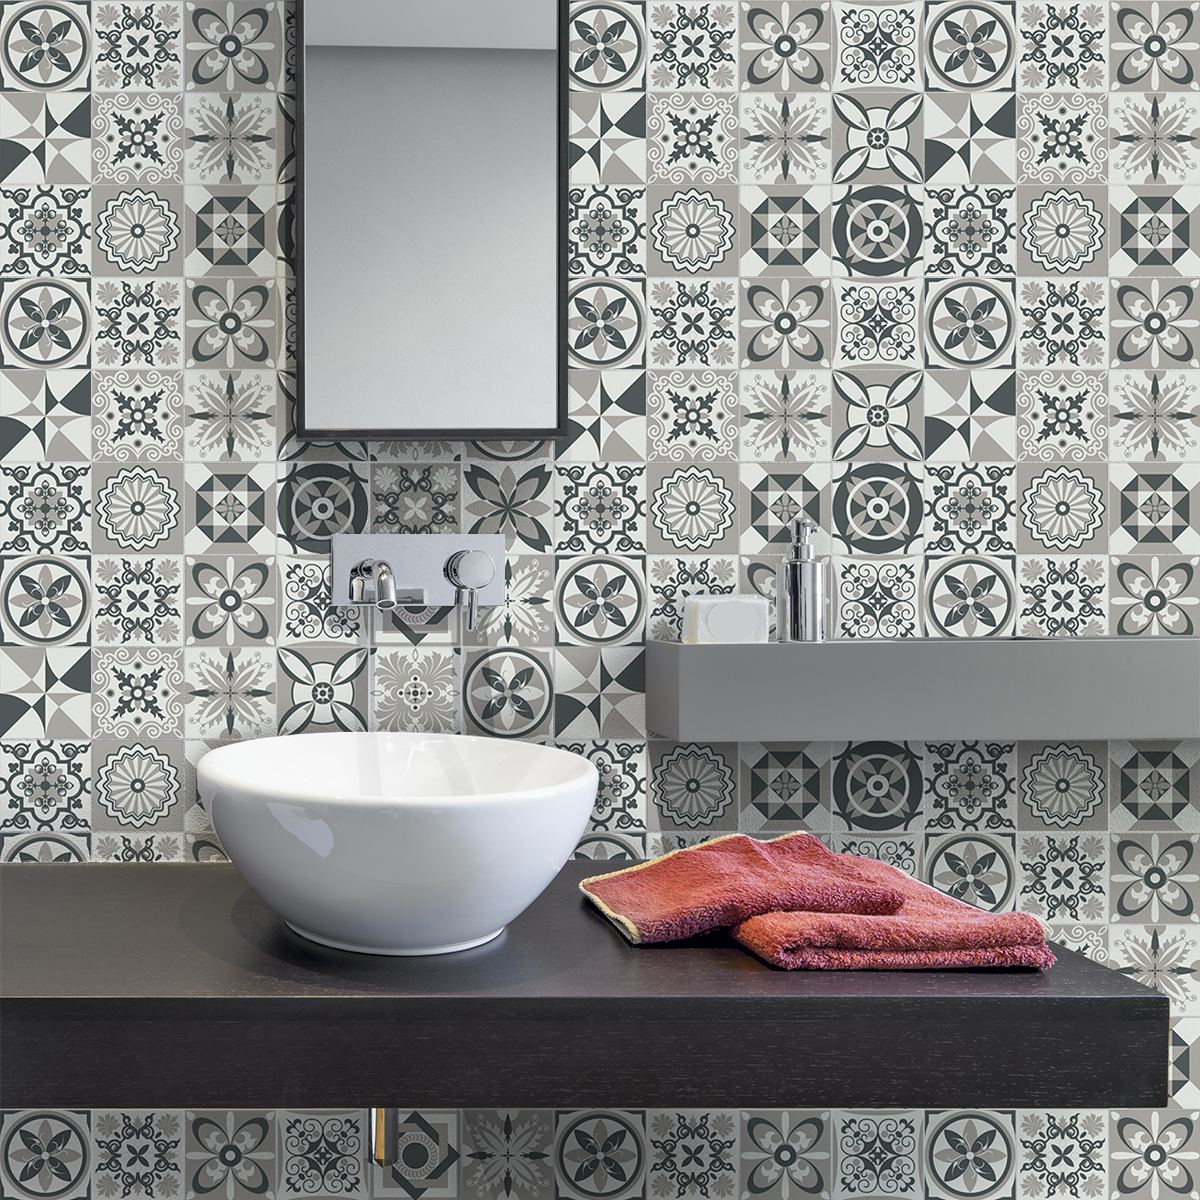 24 wall decal cement tiles azulejos elodia